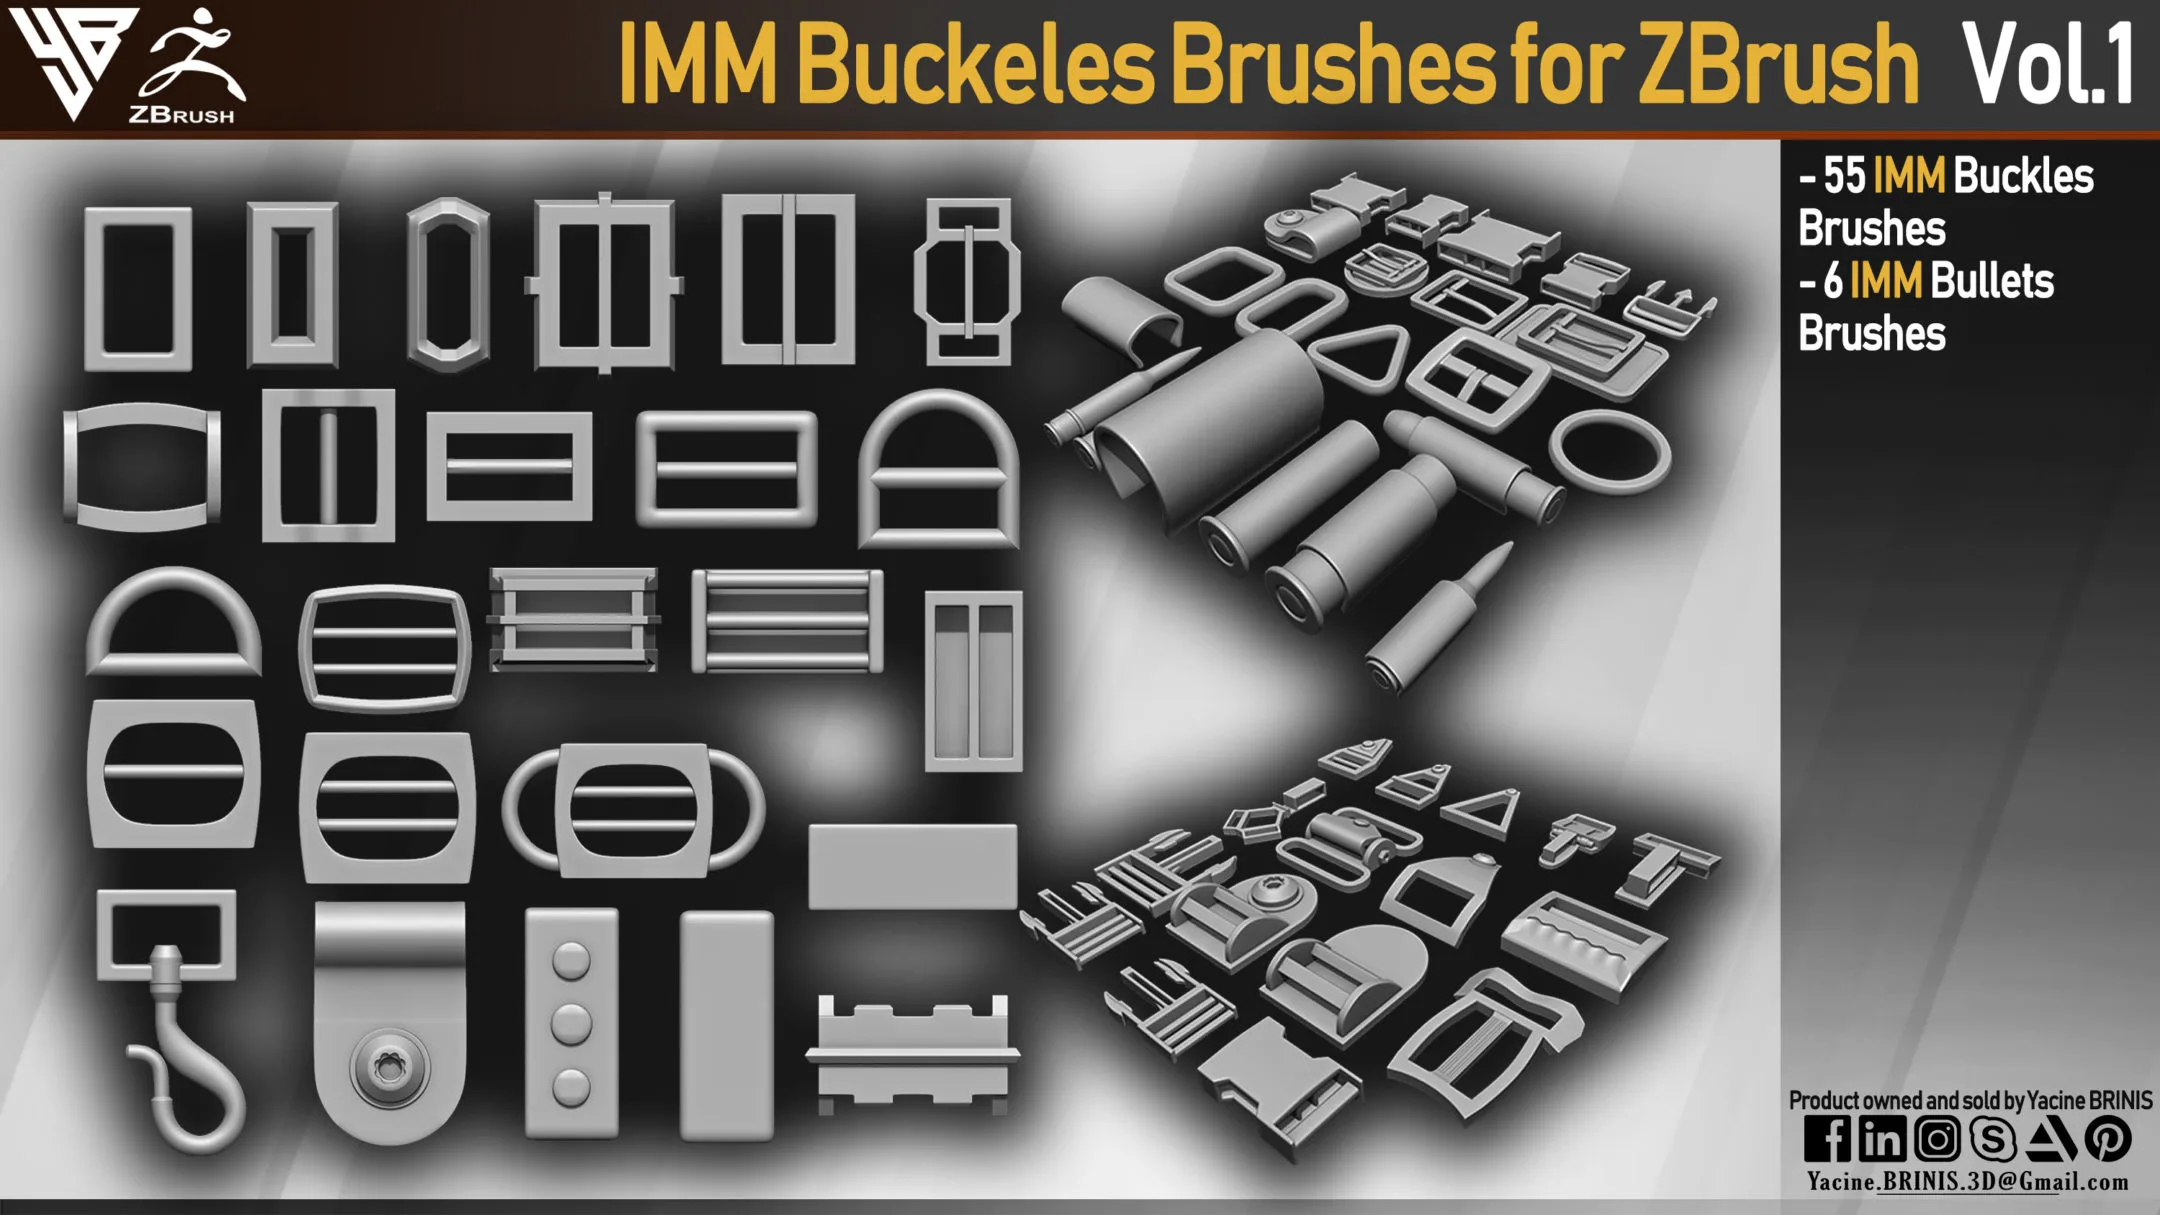 IMM Buckle Brushes and Bullet Brushes for ZBrush. Vol 1